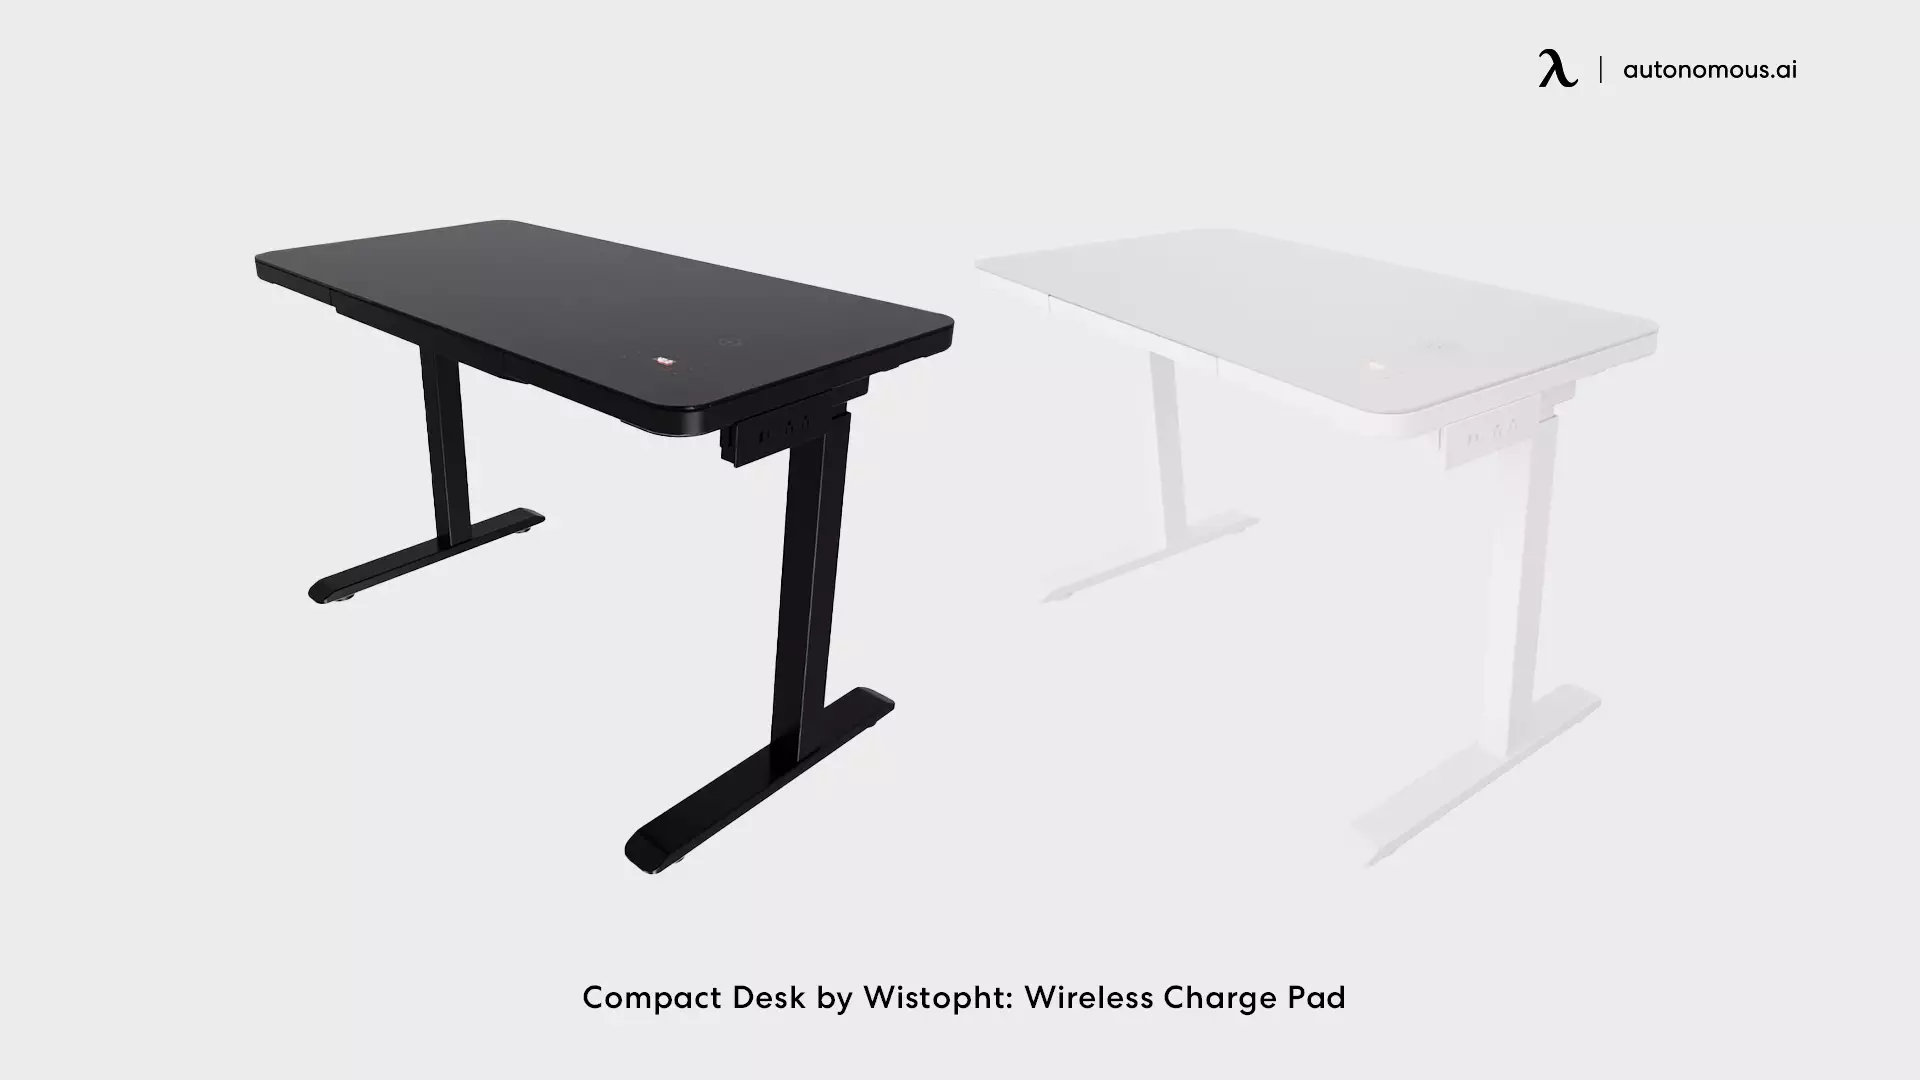 Compact Desk by Wistopht: Touchscreen Control & Wireless Charging Pad